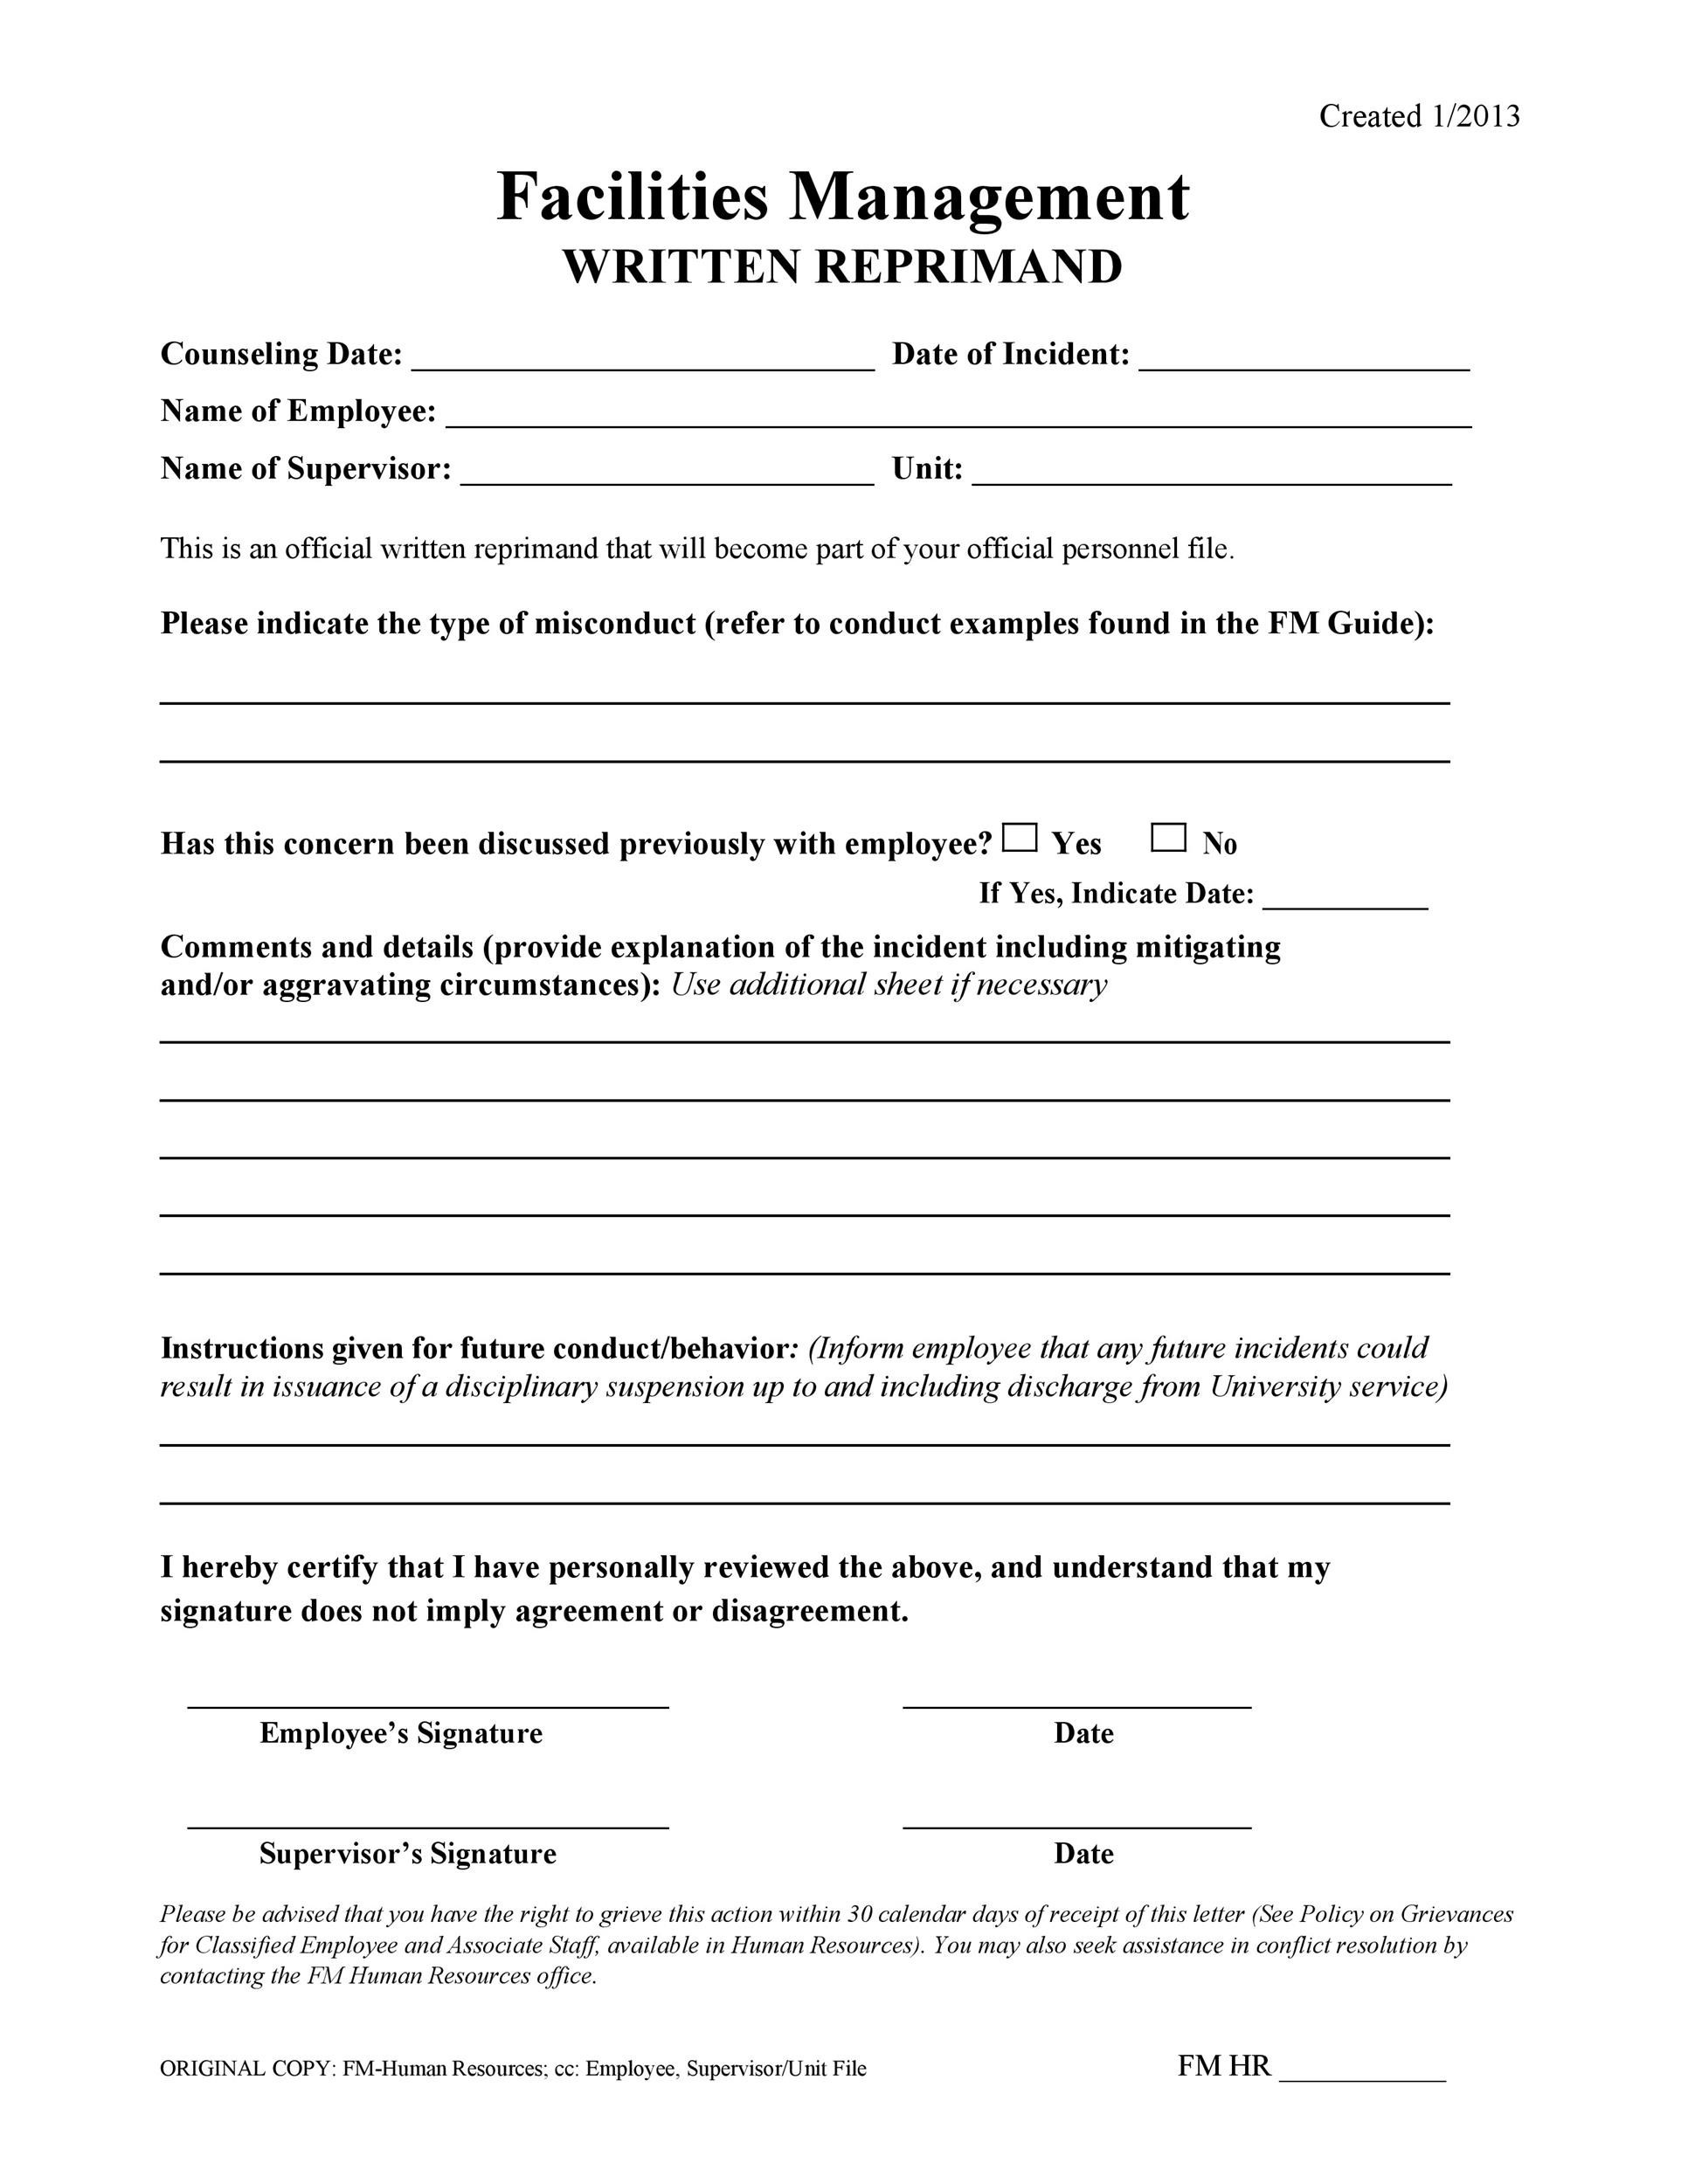 20 Effective Letters of Reprimand Templates (MS Word) ᐅ TemplateLab